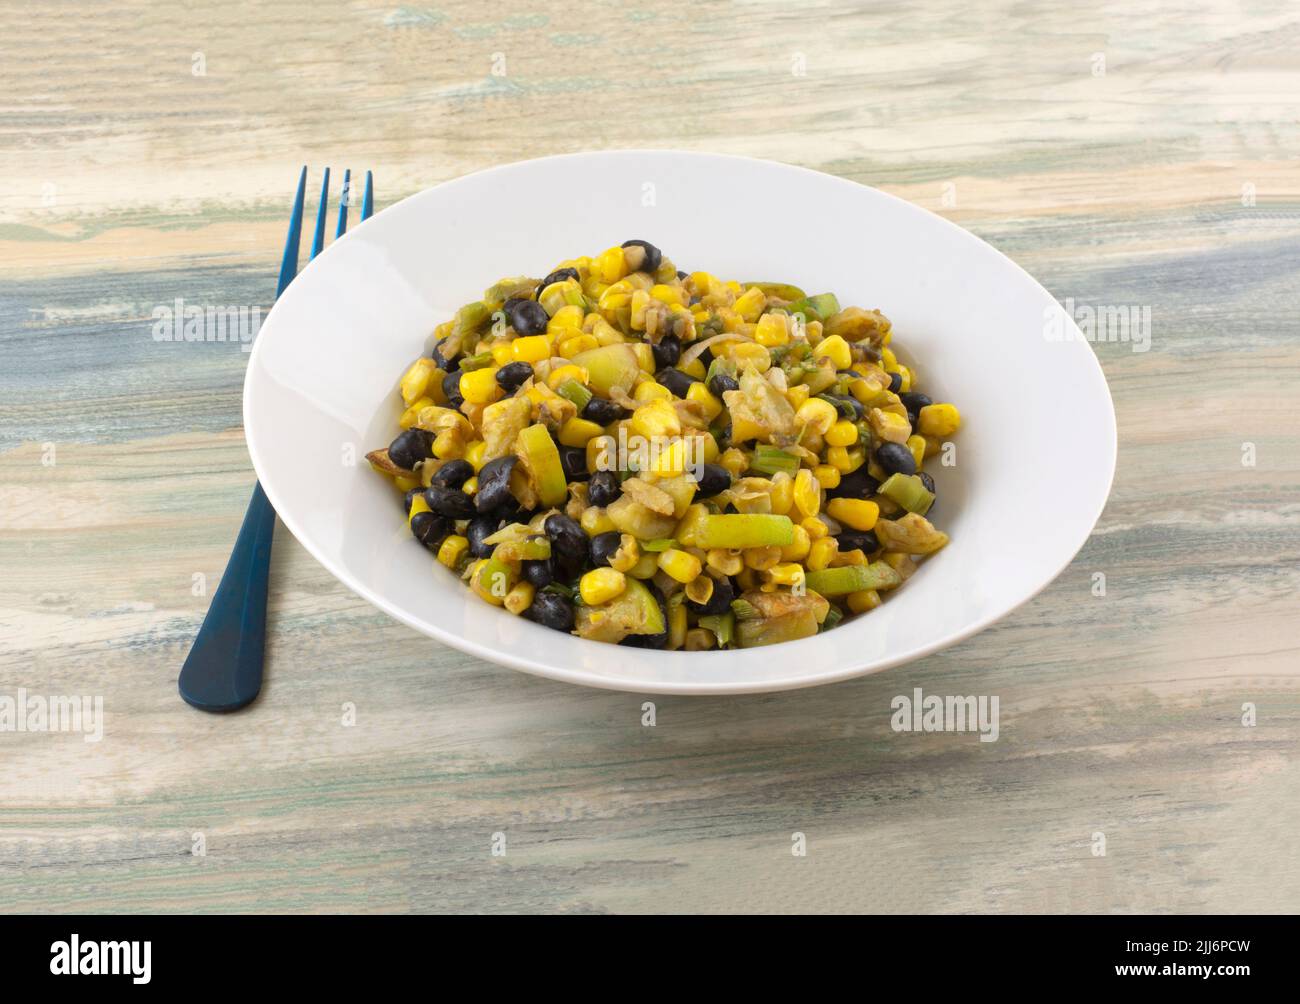 Cooked black beans, corn, and zucchini vegetable side dish or ingredient or filing in white bowl with blue fork Stock Photo